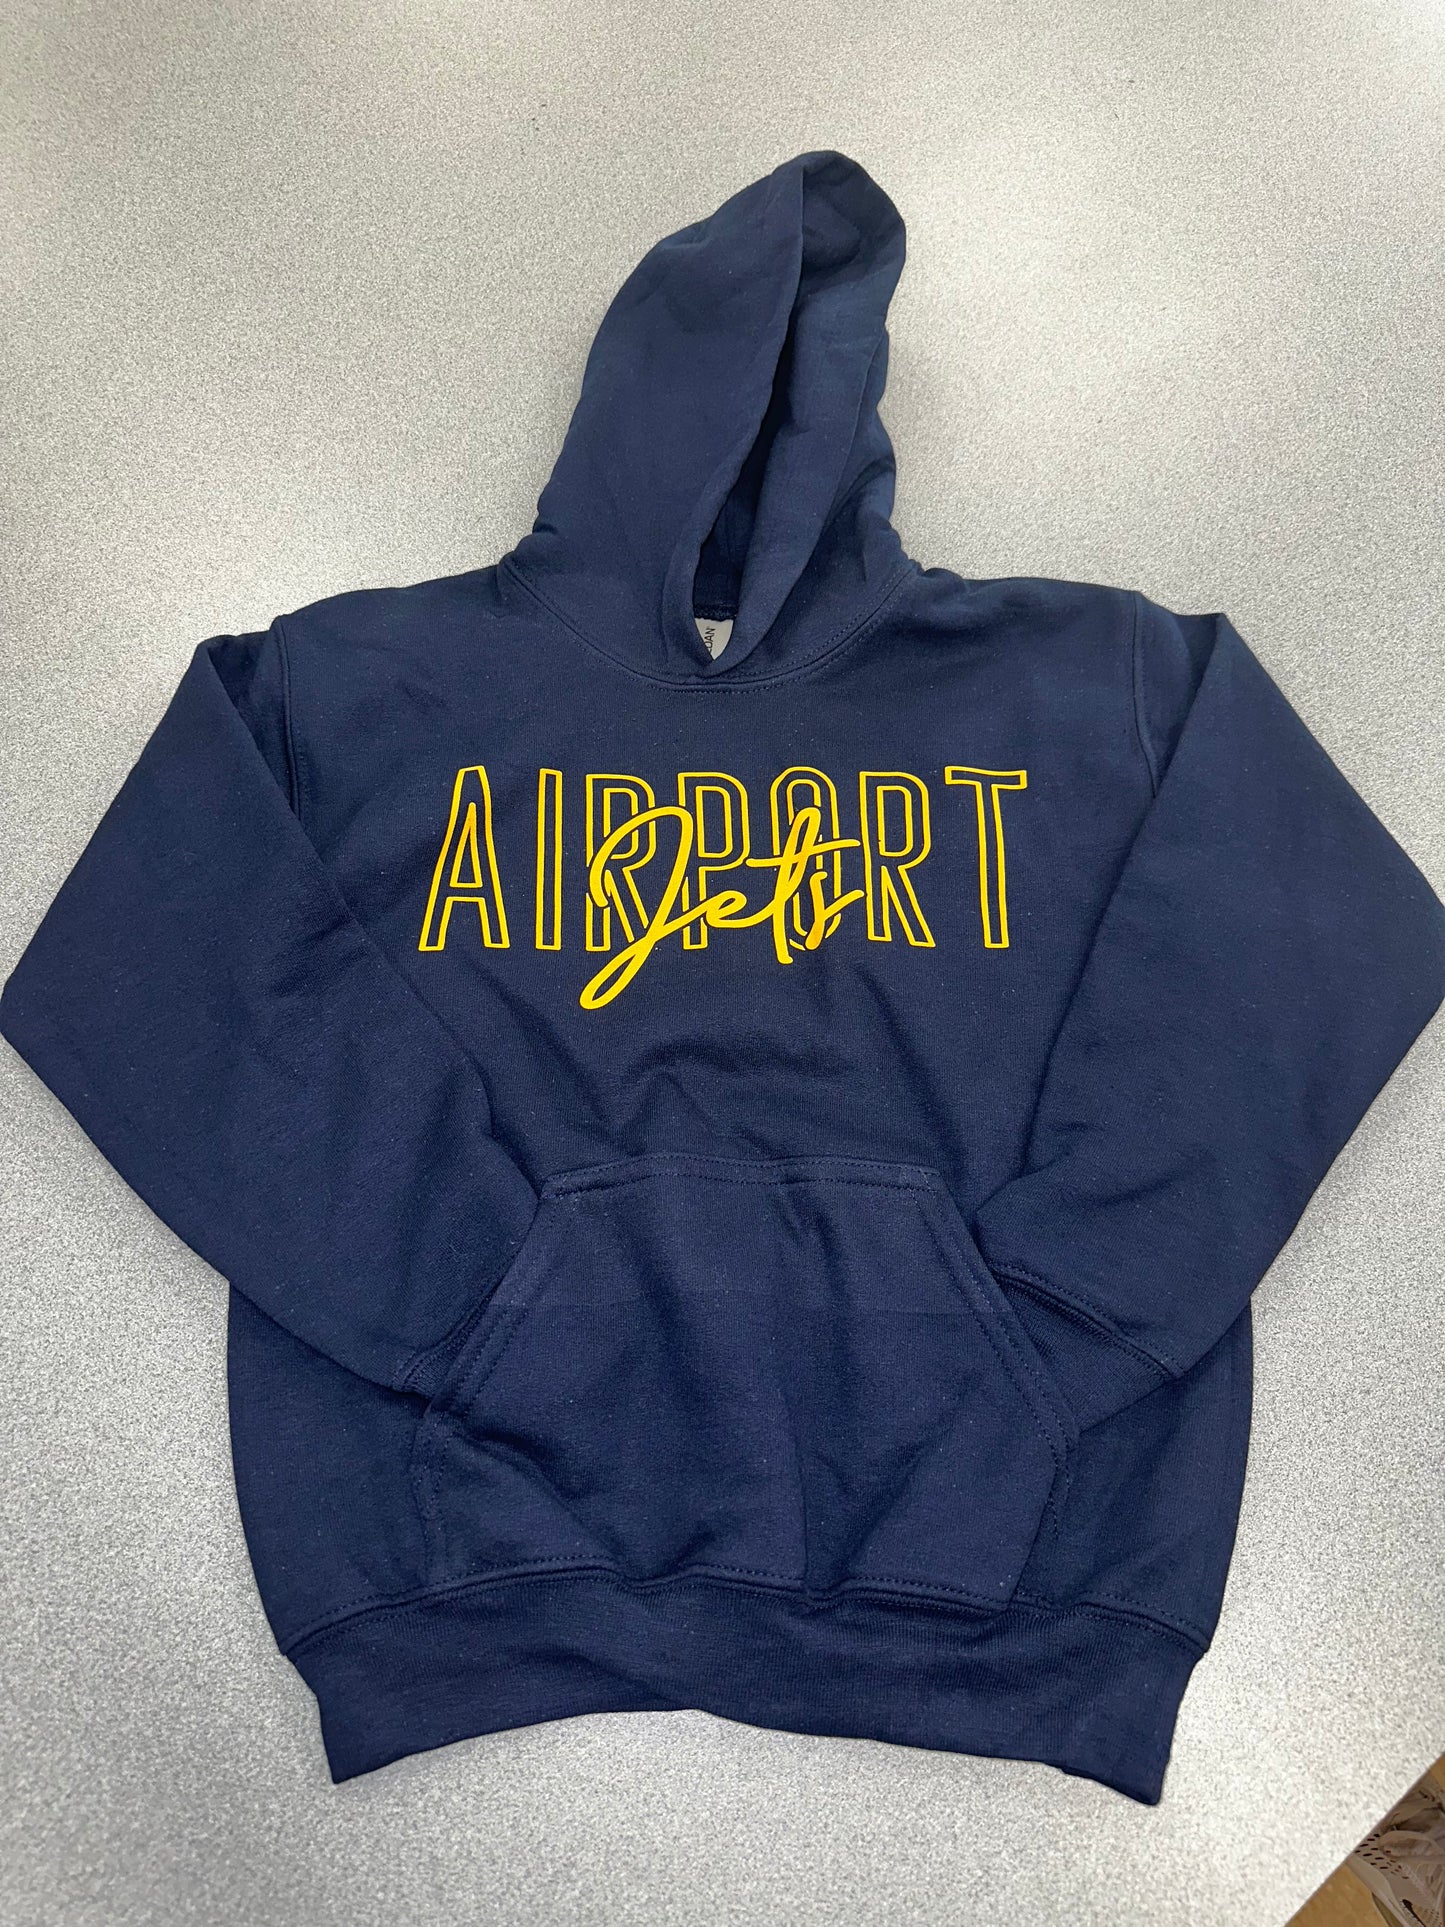 Youth Navy Blue with AIport Jets